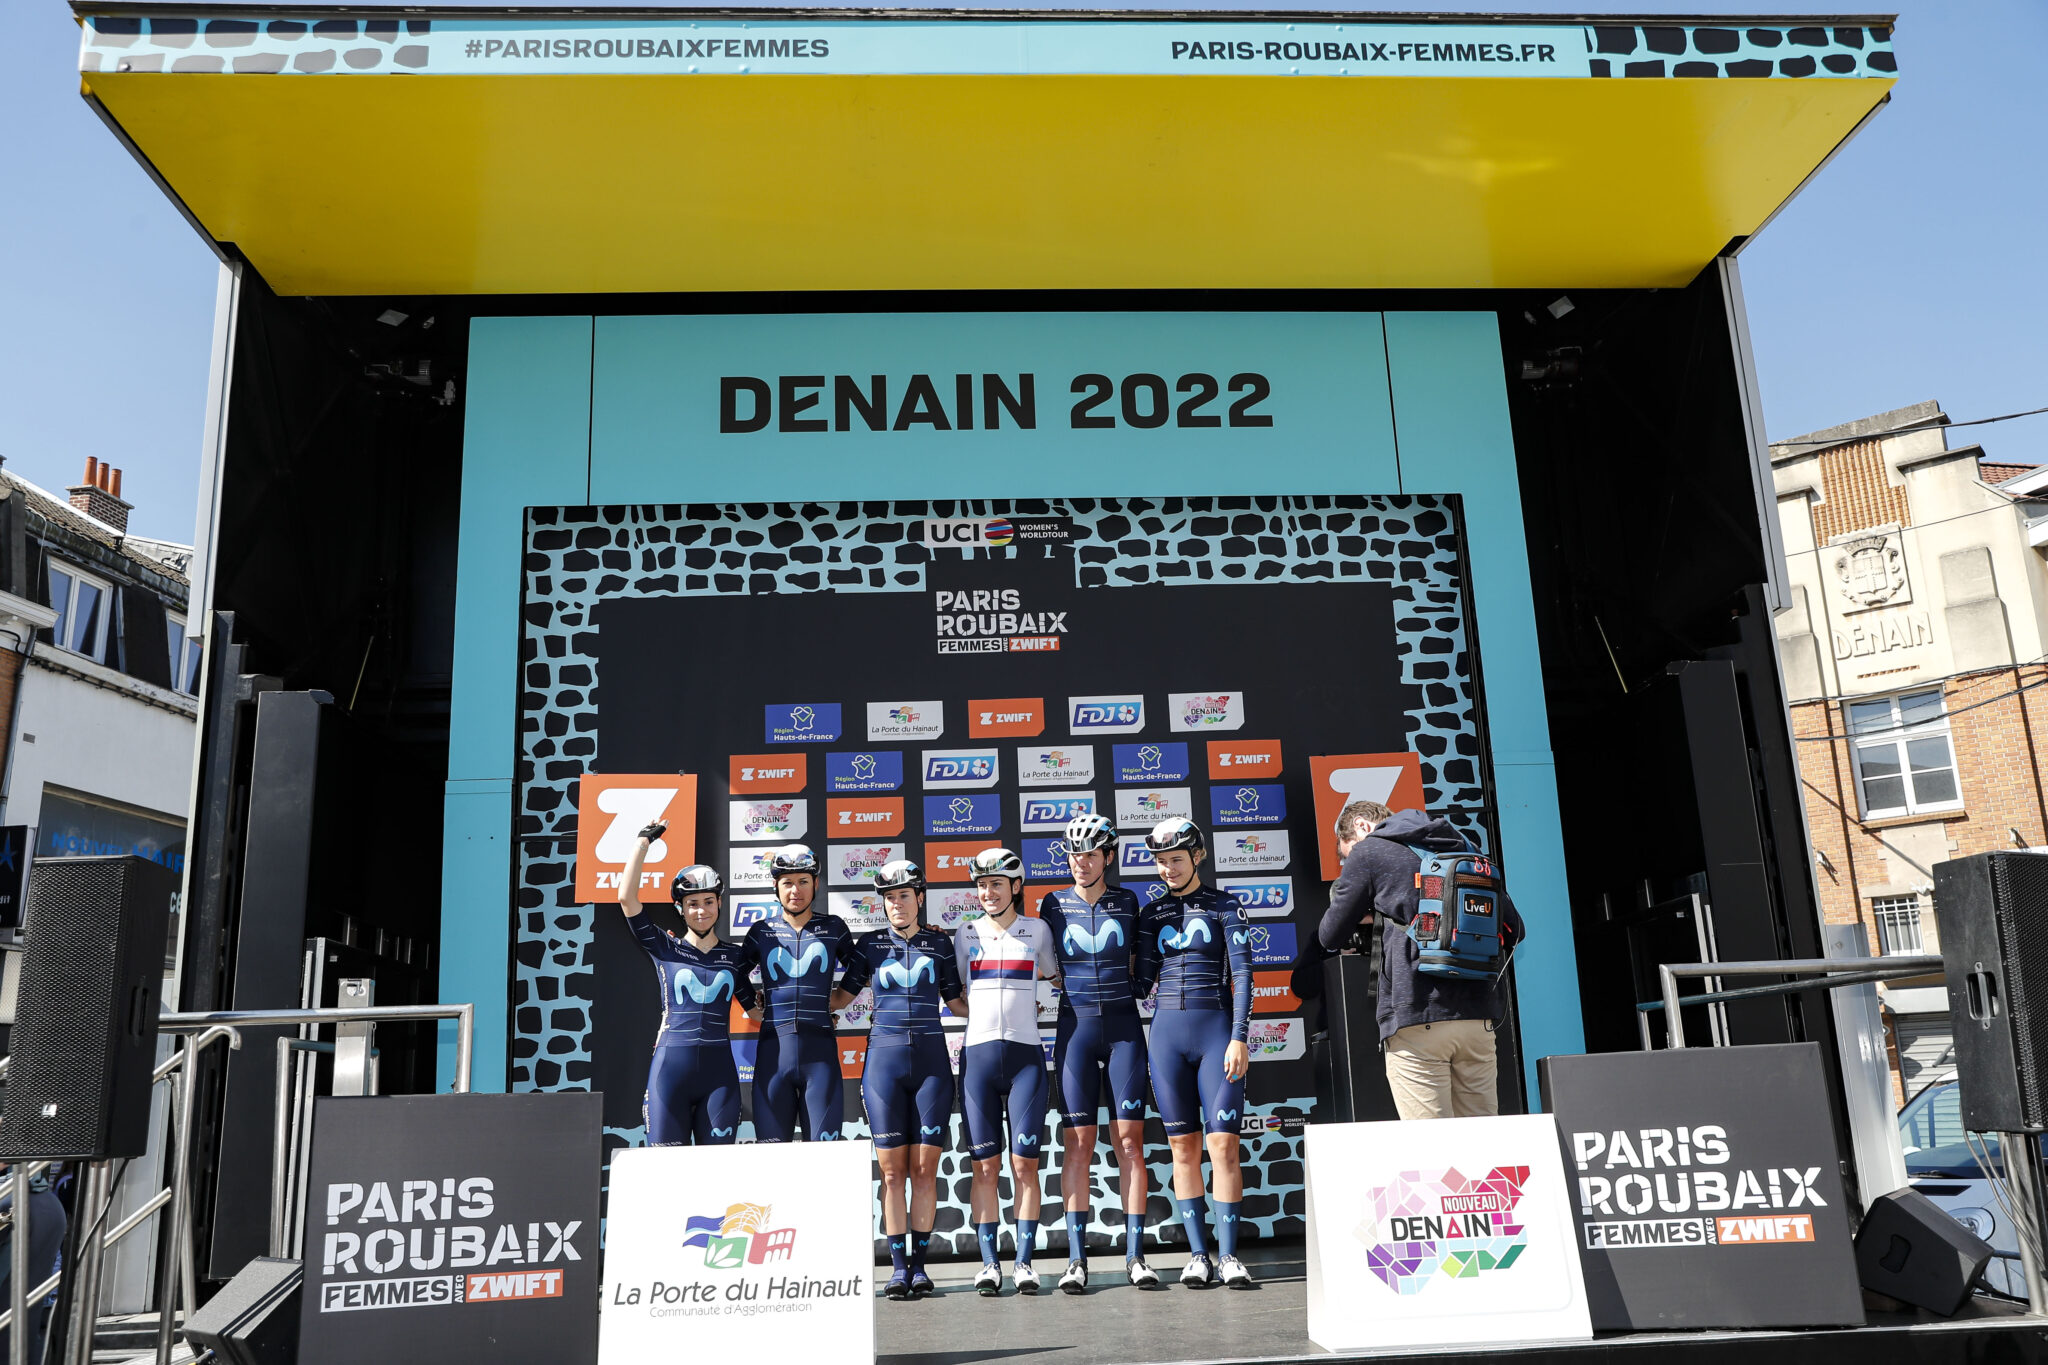 Emma Norsgaard (11th), again close to the best in the second edition of Paris-Roubaix